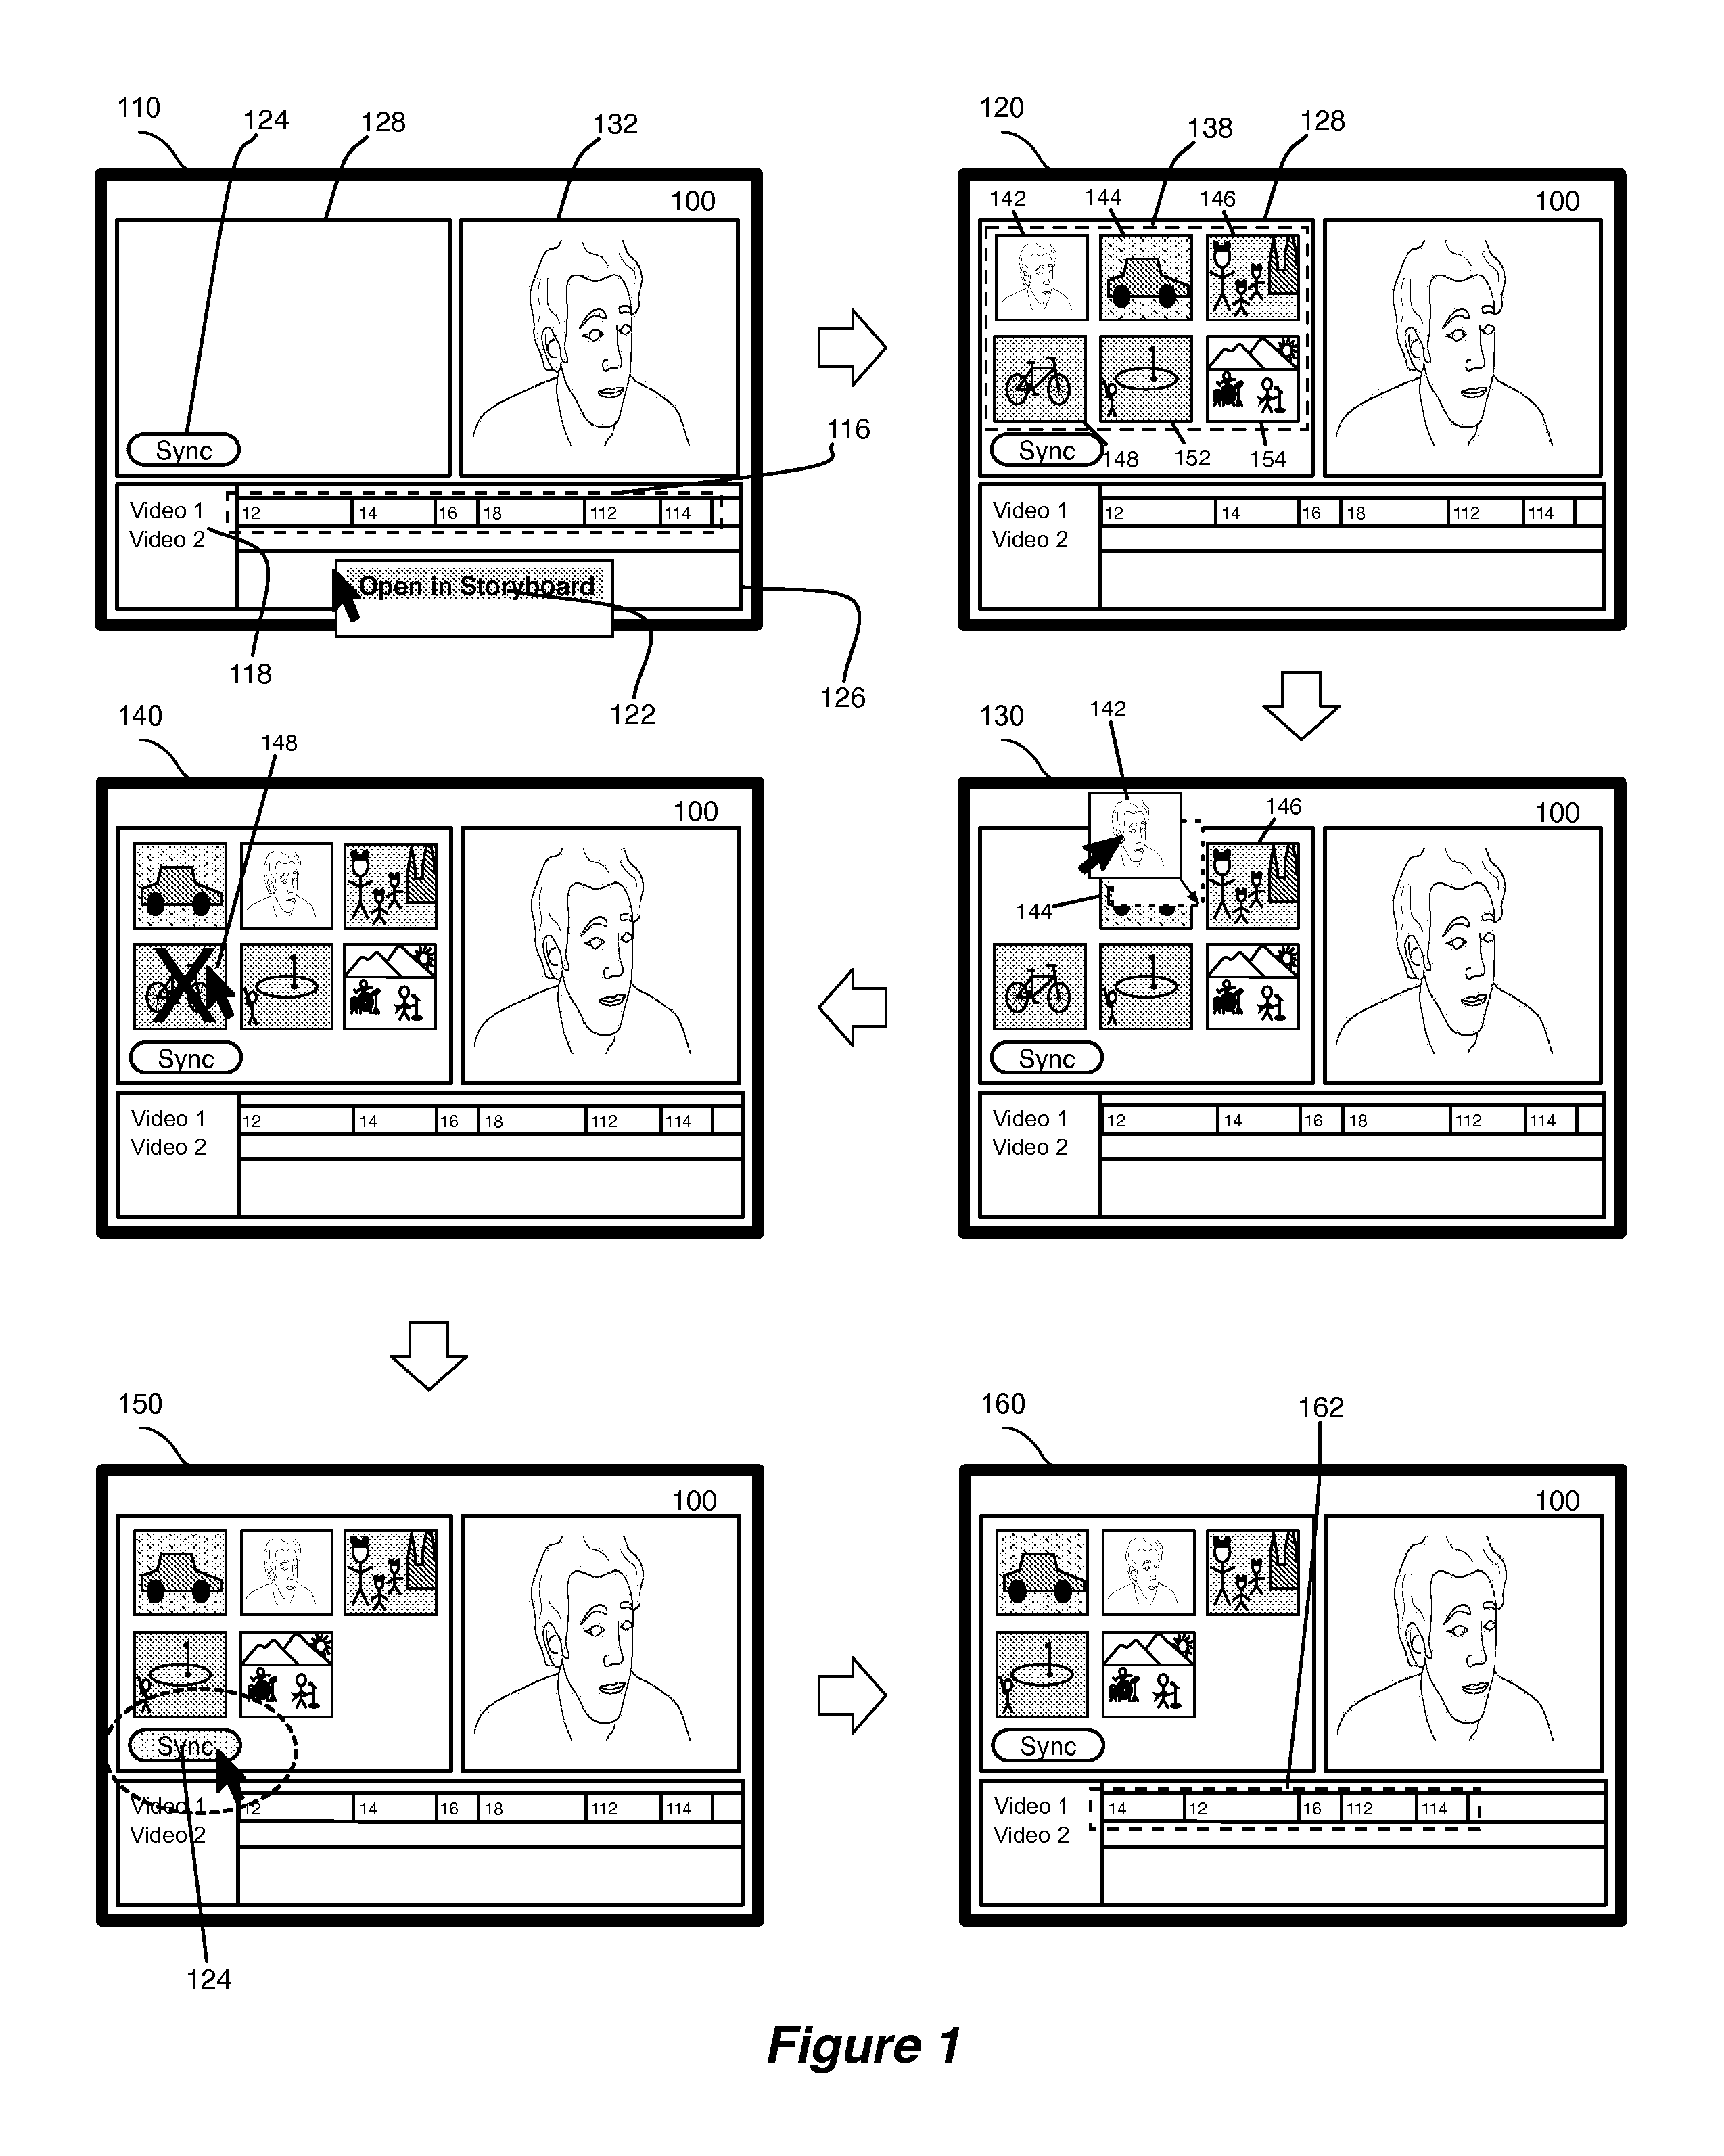 Tool for presenting and editing a storyboard representation of a composite presentation